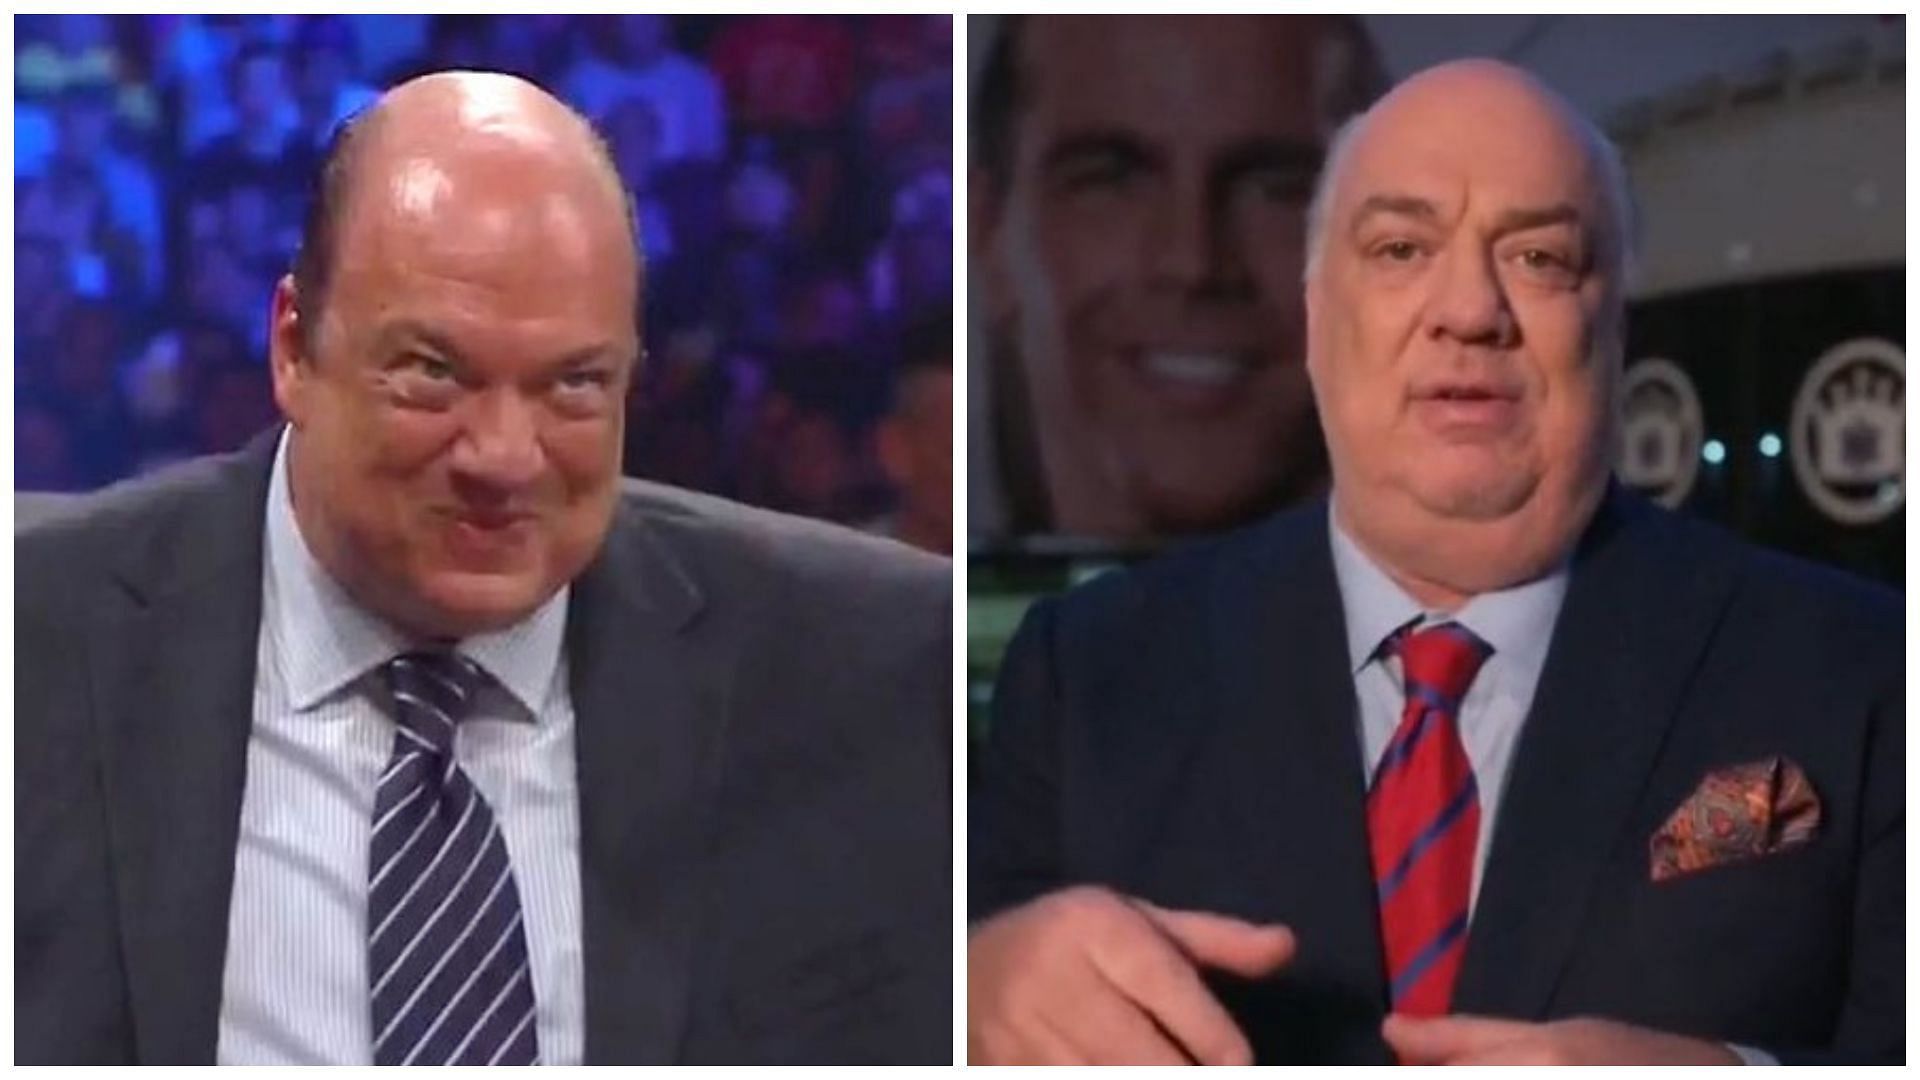 Paul Heyman is a Special Counsel to Roman Reigns.